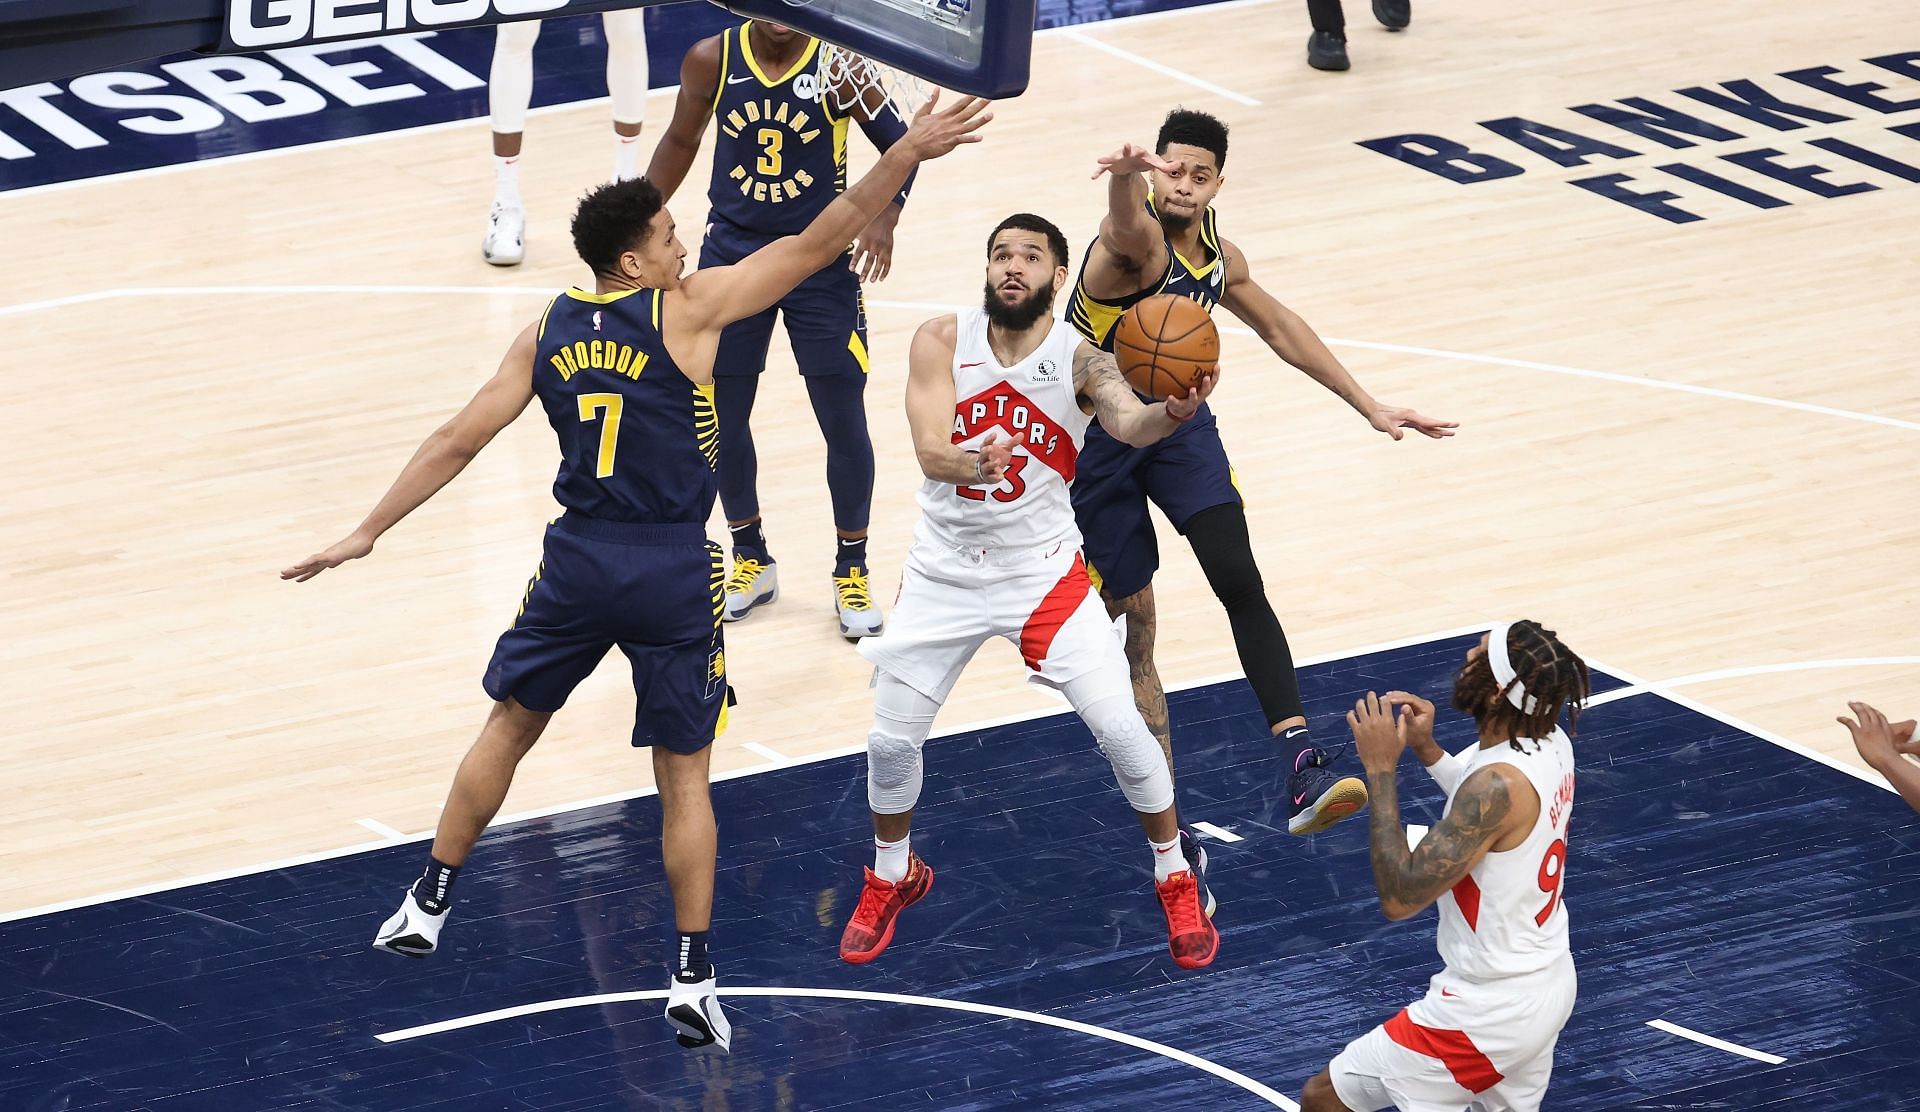 The Indiana Pacers will host the Toronto Raptors in a regular-season game on November 26th.